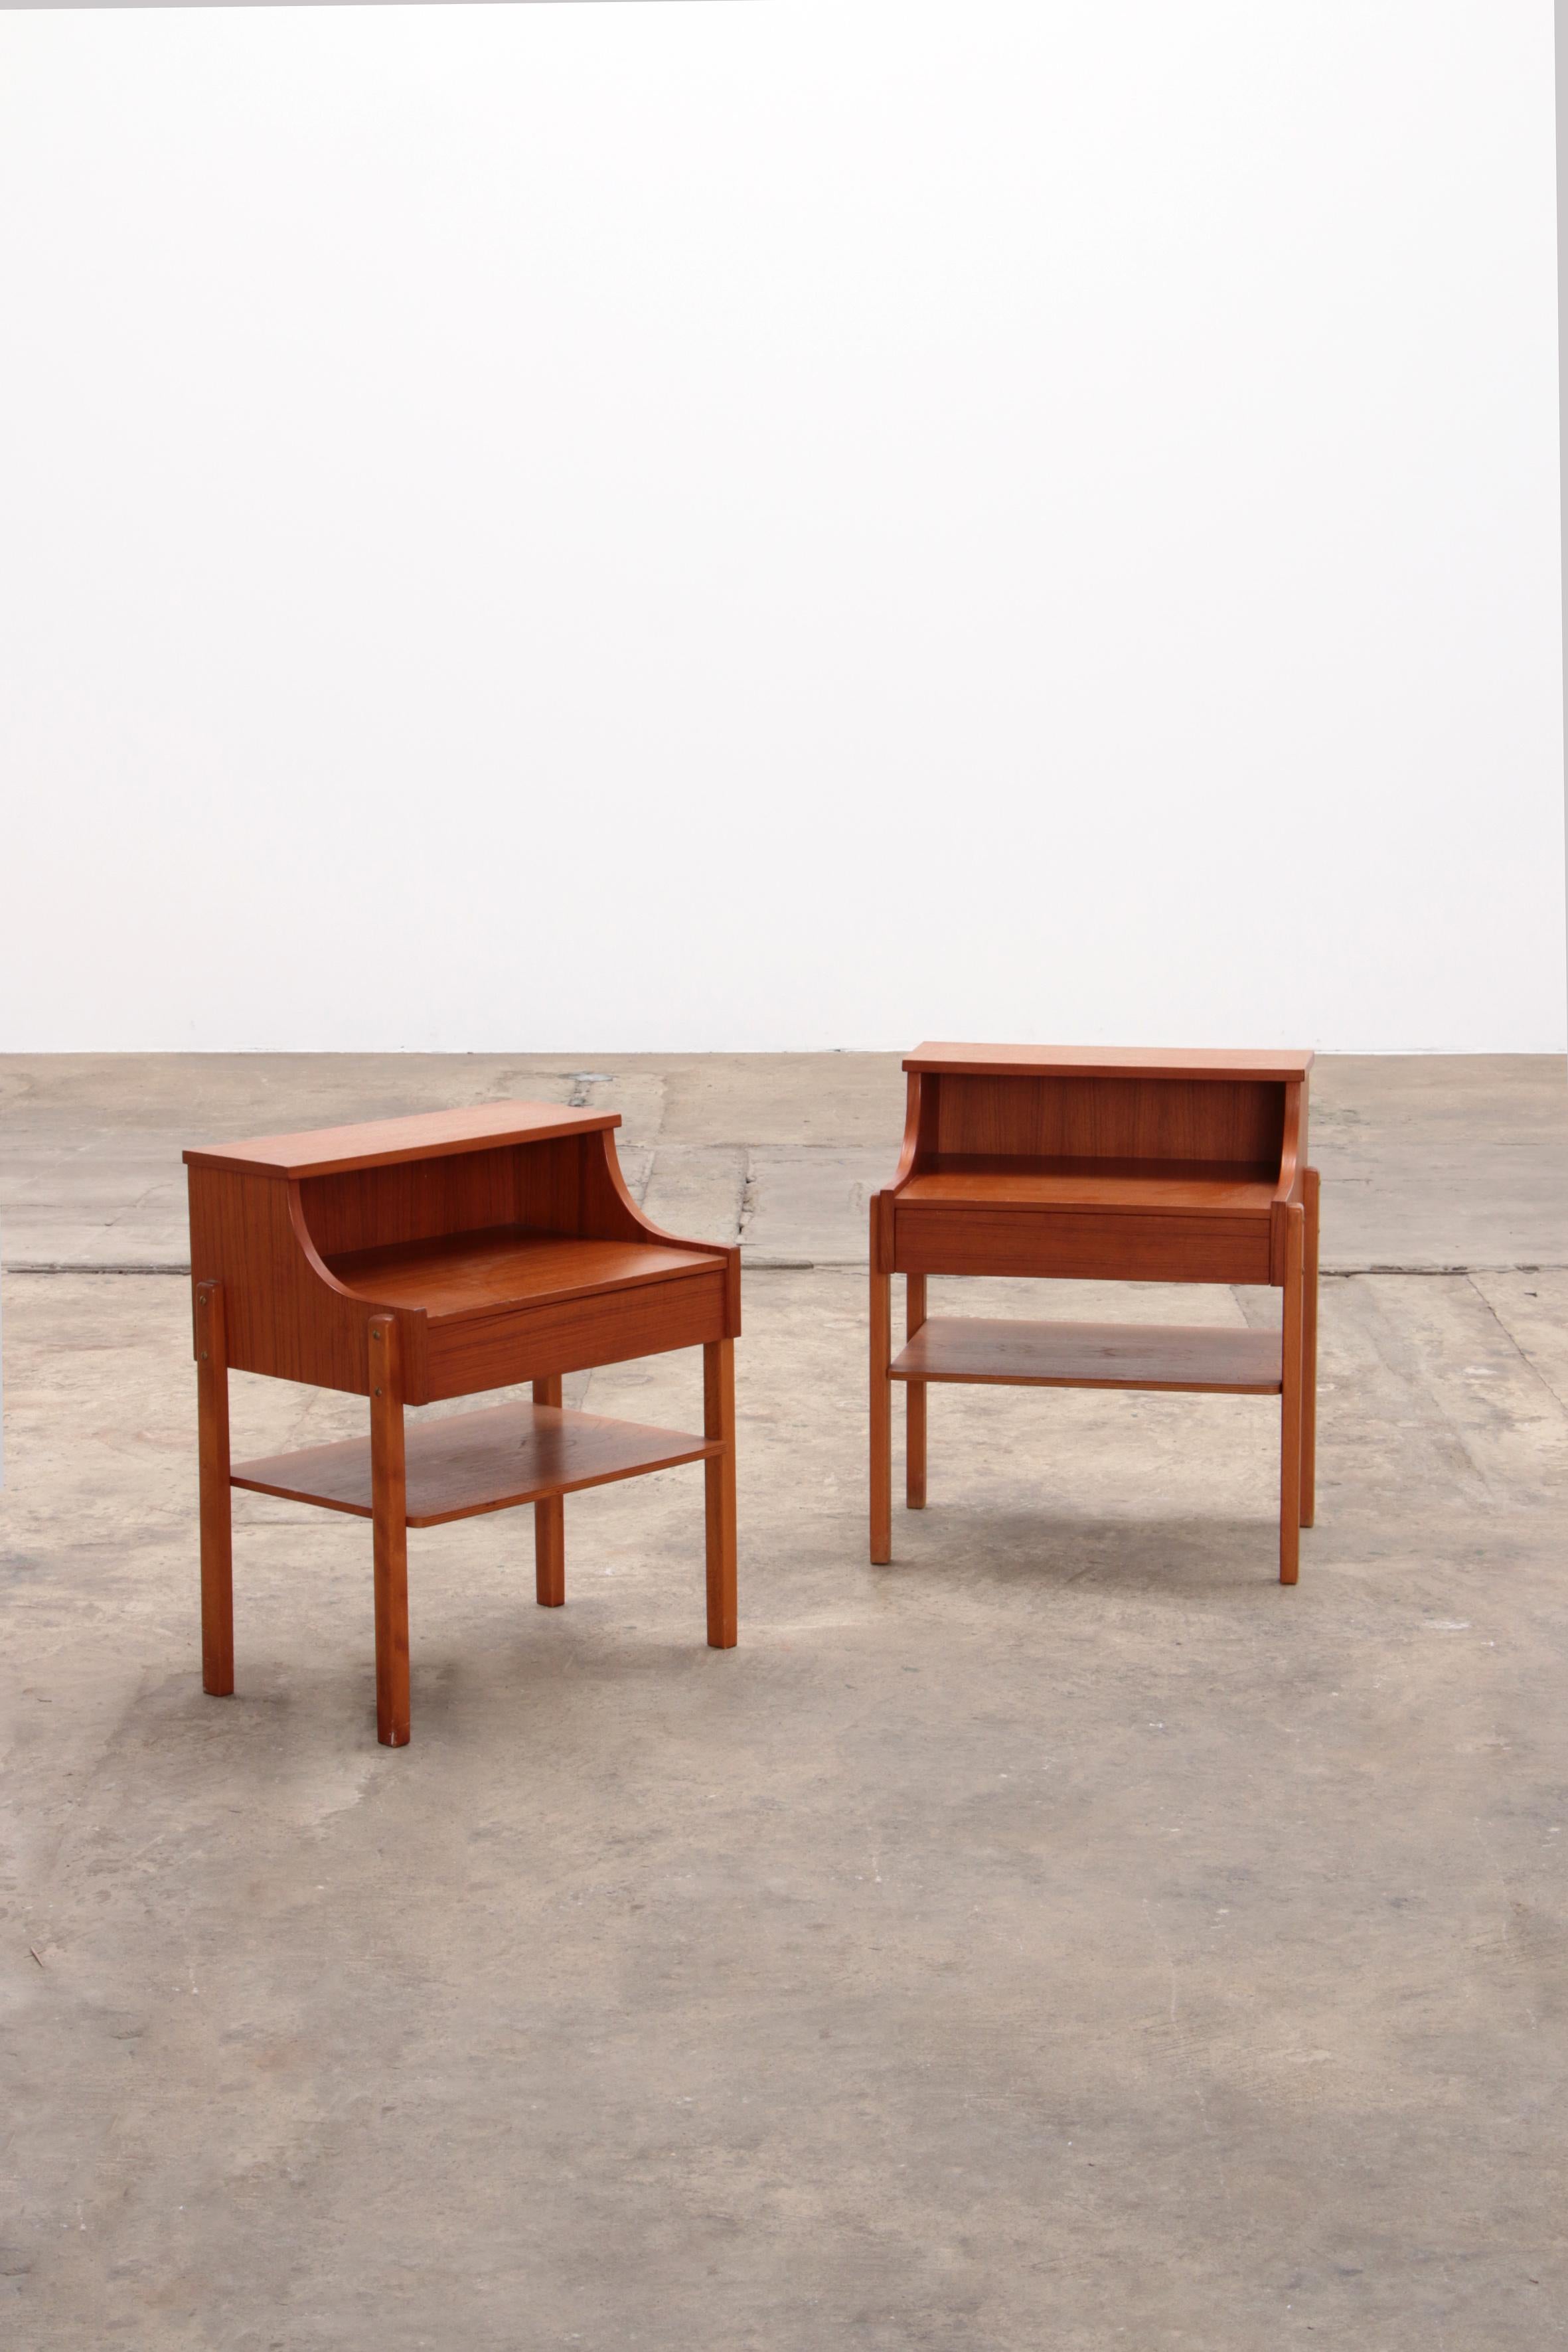 Mid-20th Century Pair of Scandinavian Bedside Tables in Teak by AB Carlstrom & Co, 1960 For Sale